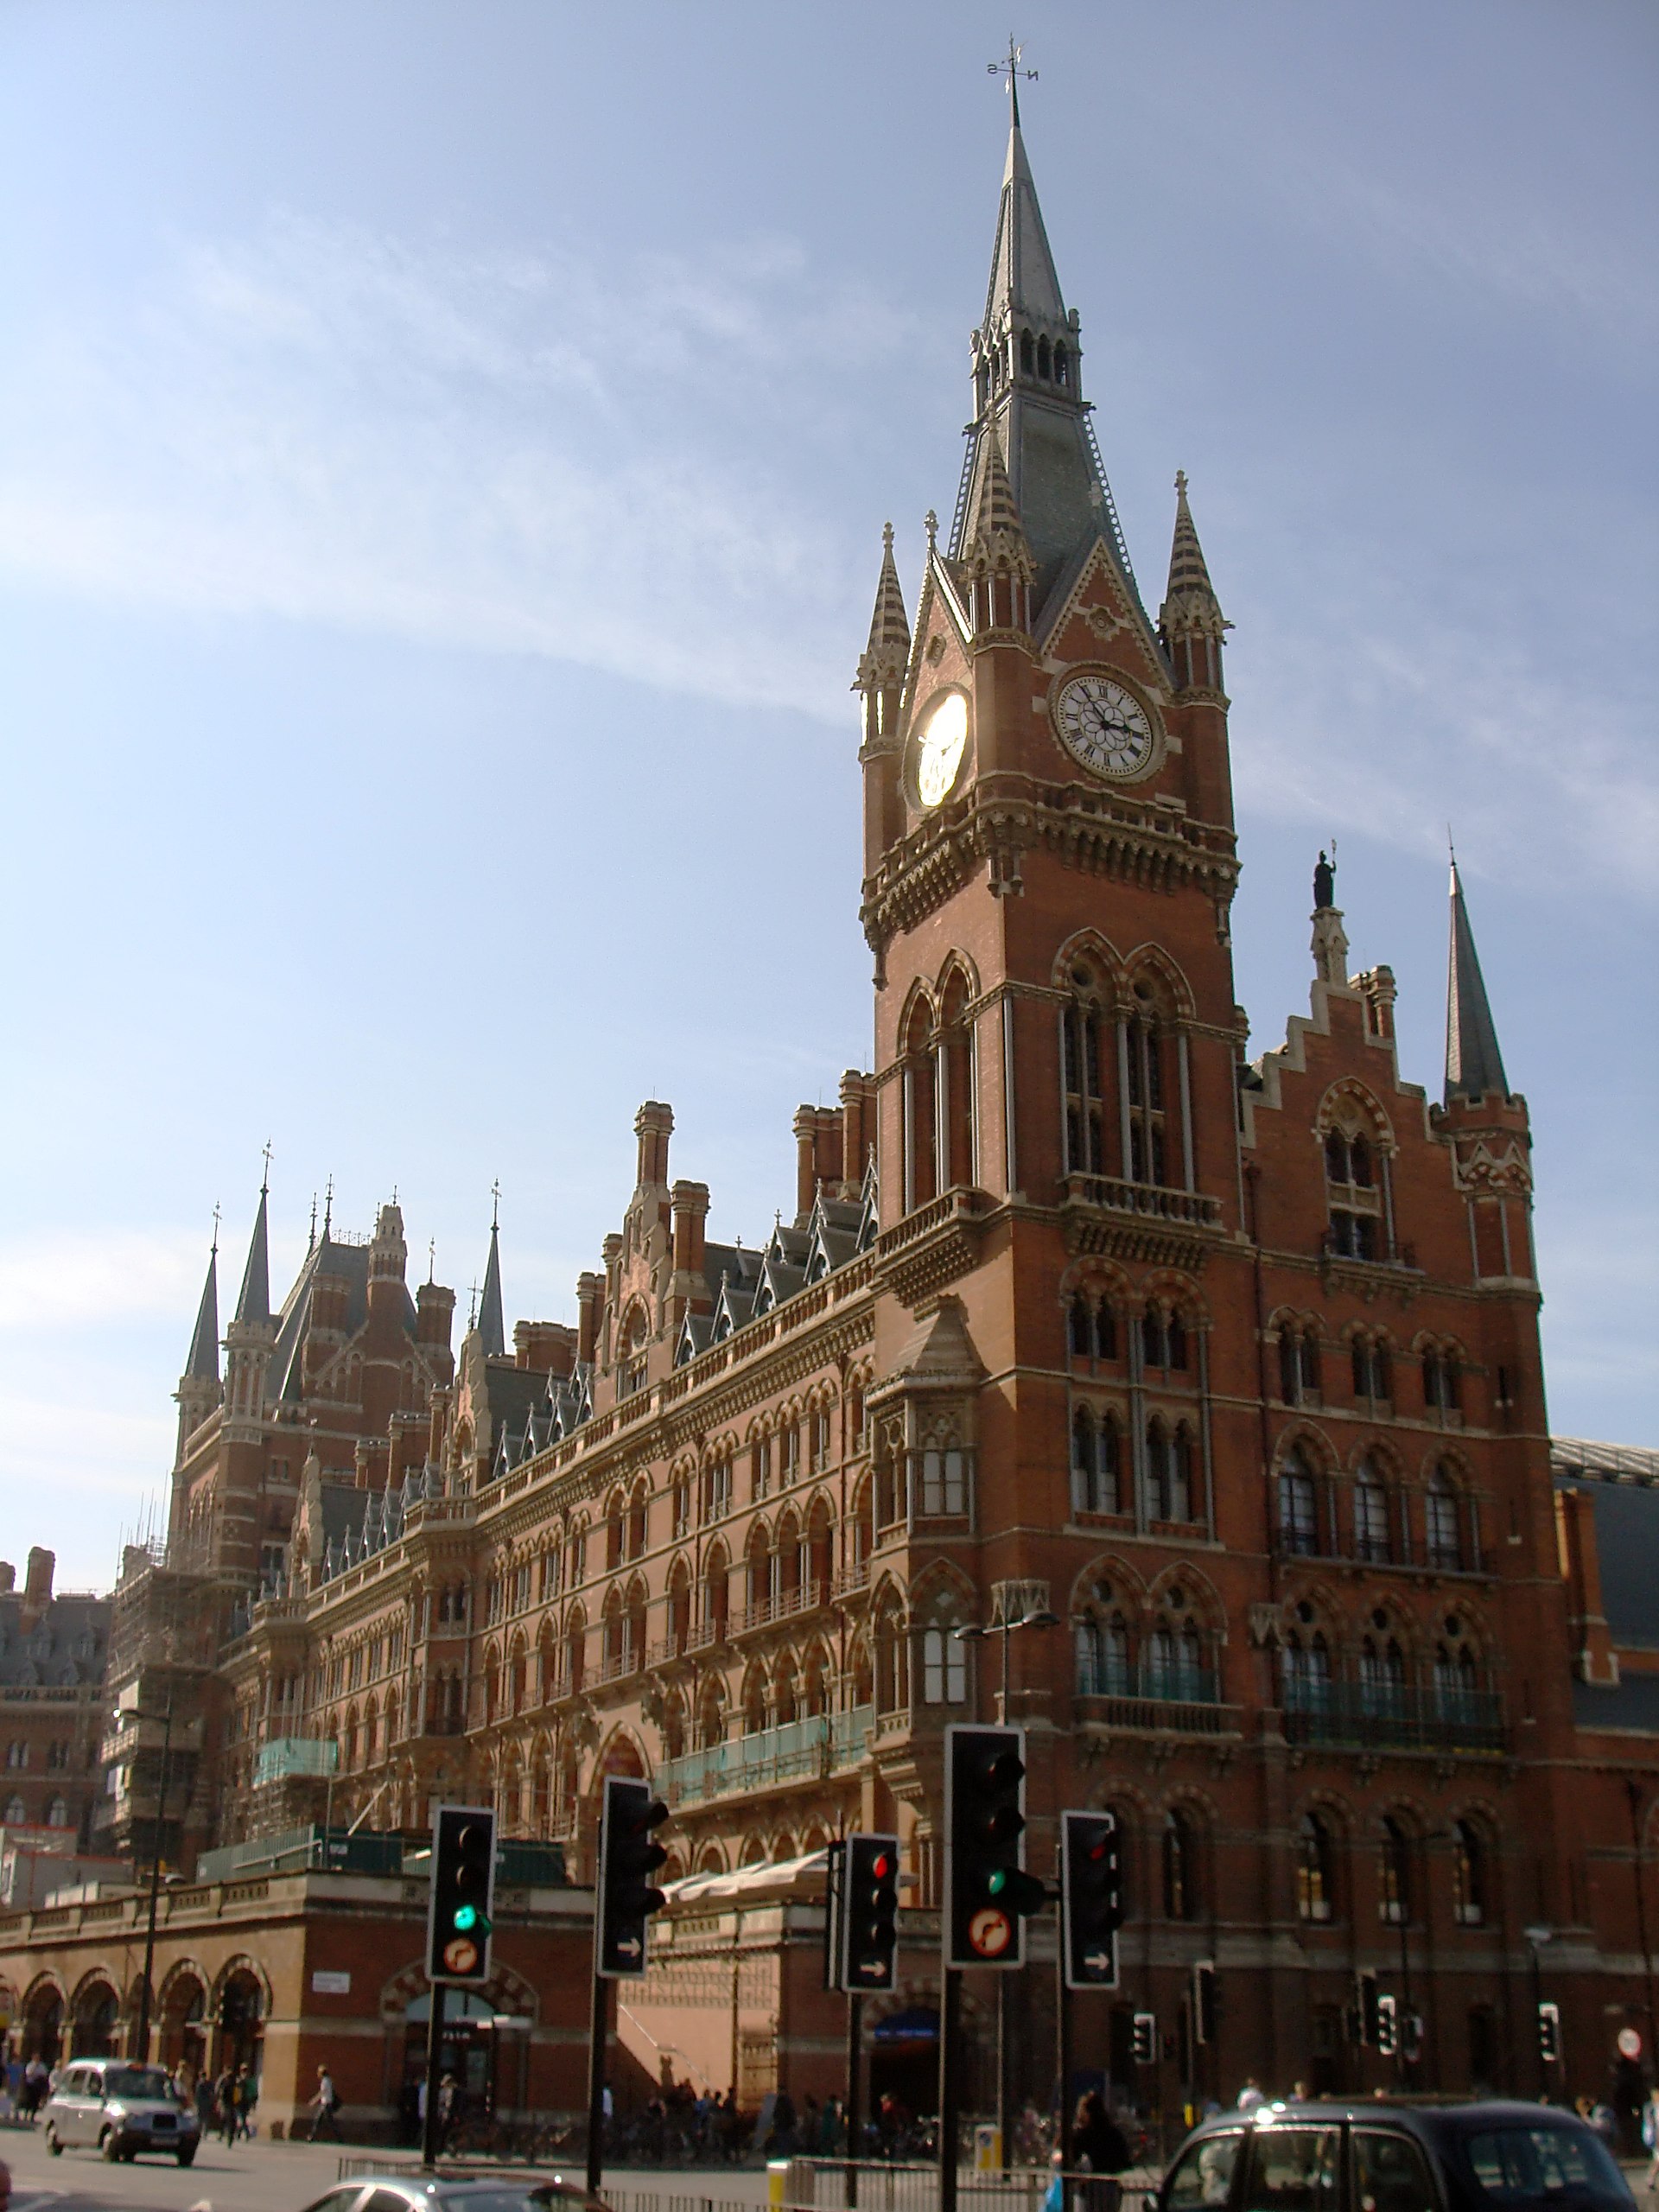 The midland hotel in london essay